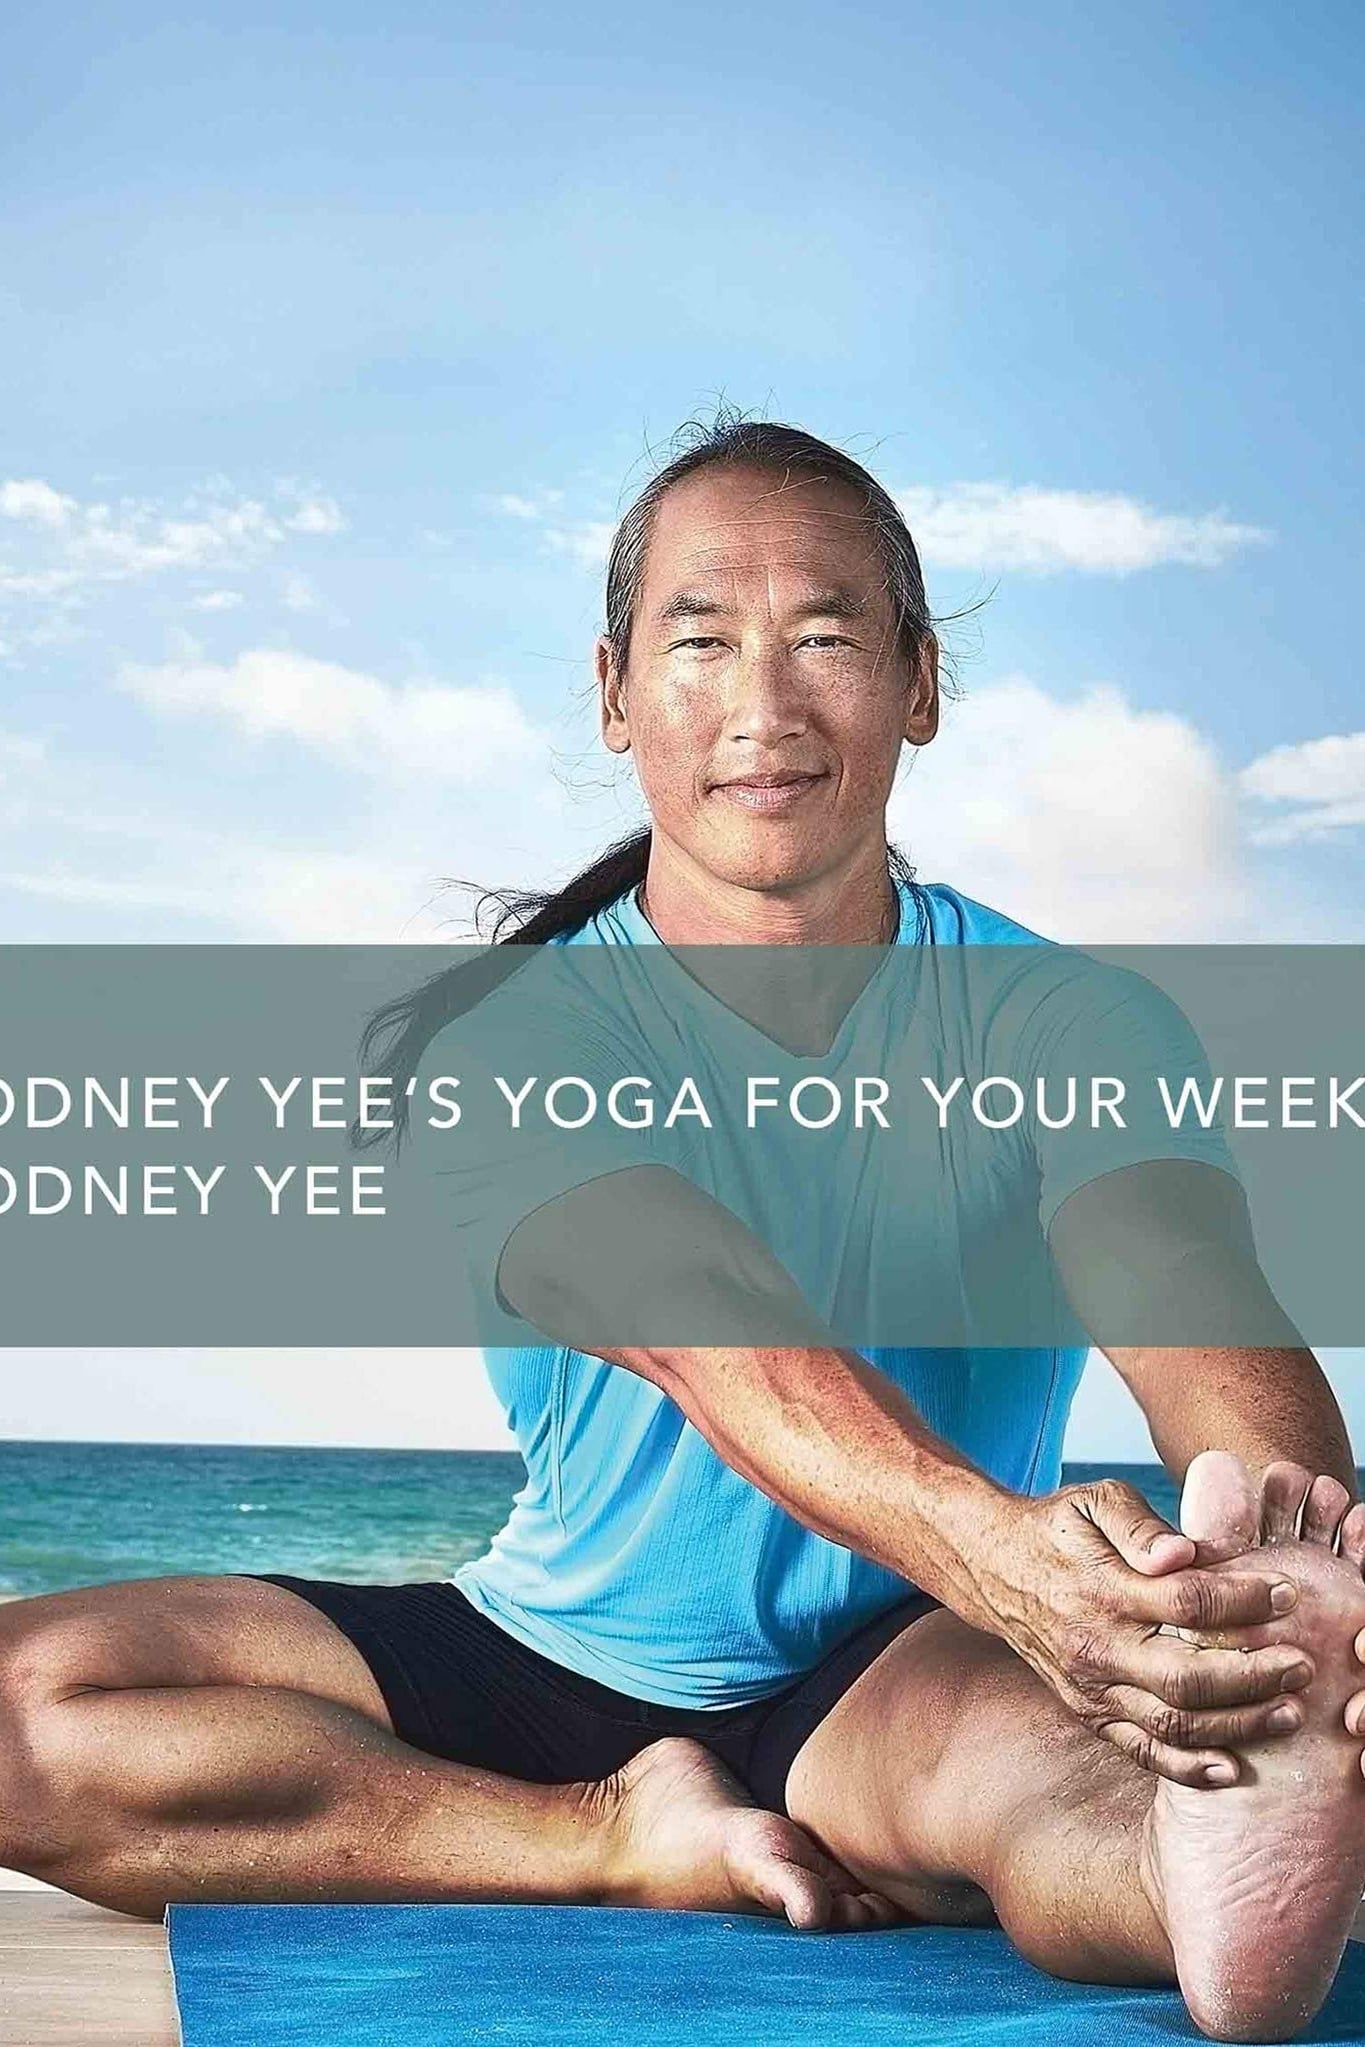 Rodney Yee's Yoga for Your Week: P.M. Release